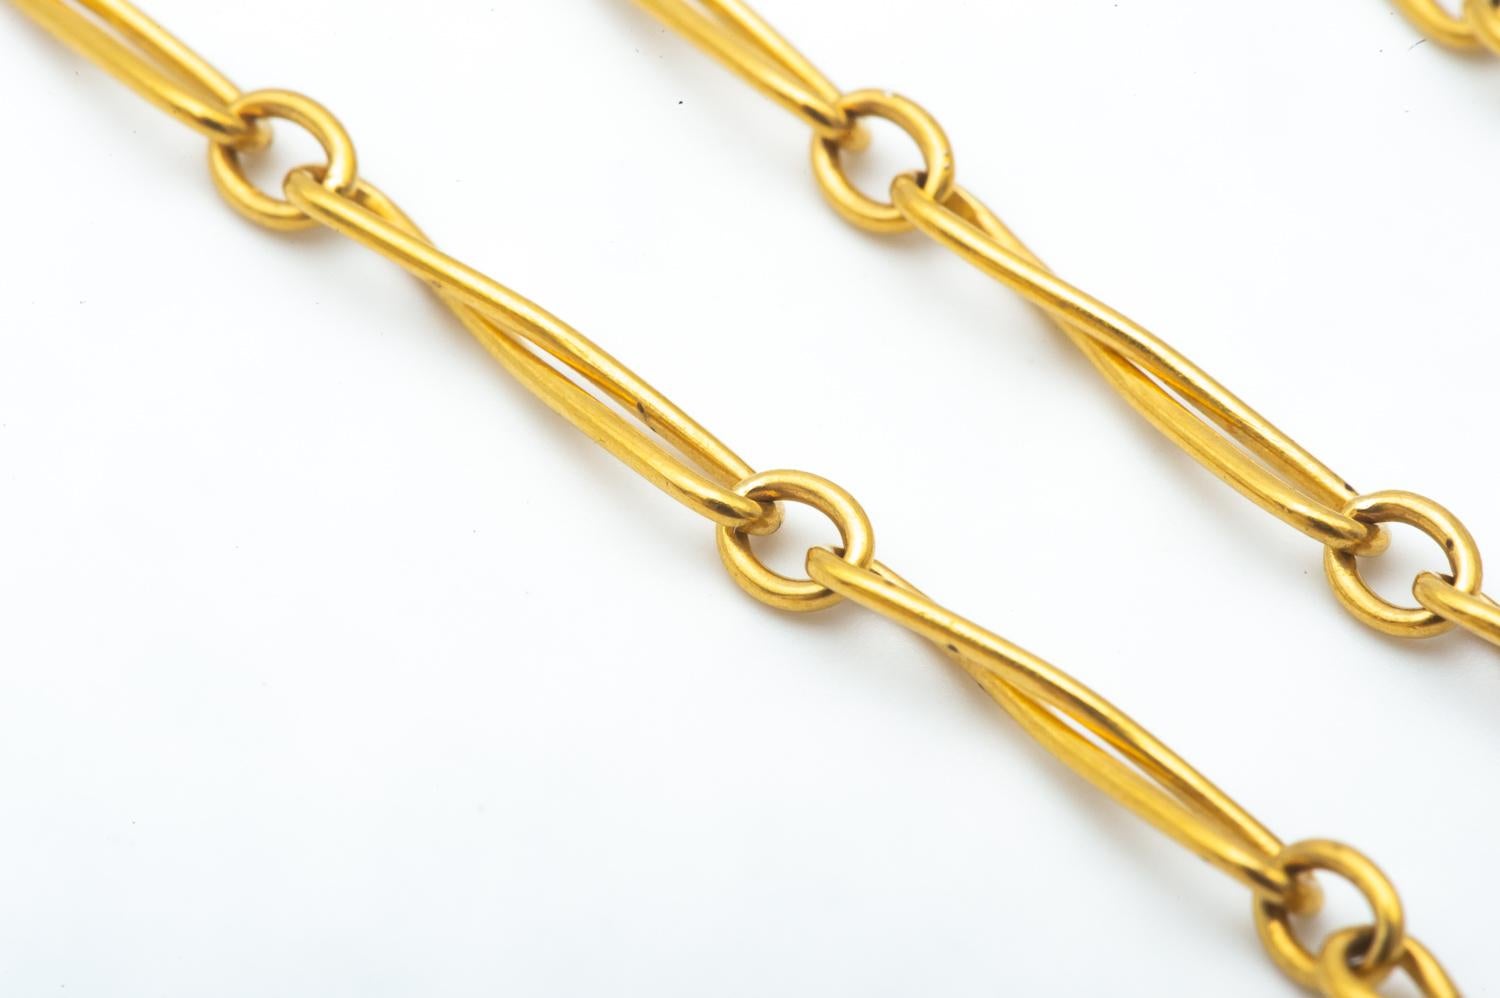 Artisan 18k Yellow Gold Gusset Watch Chain with 8-Shaped Links